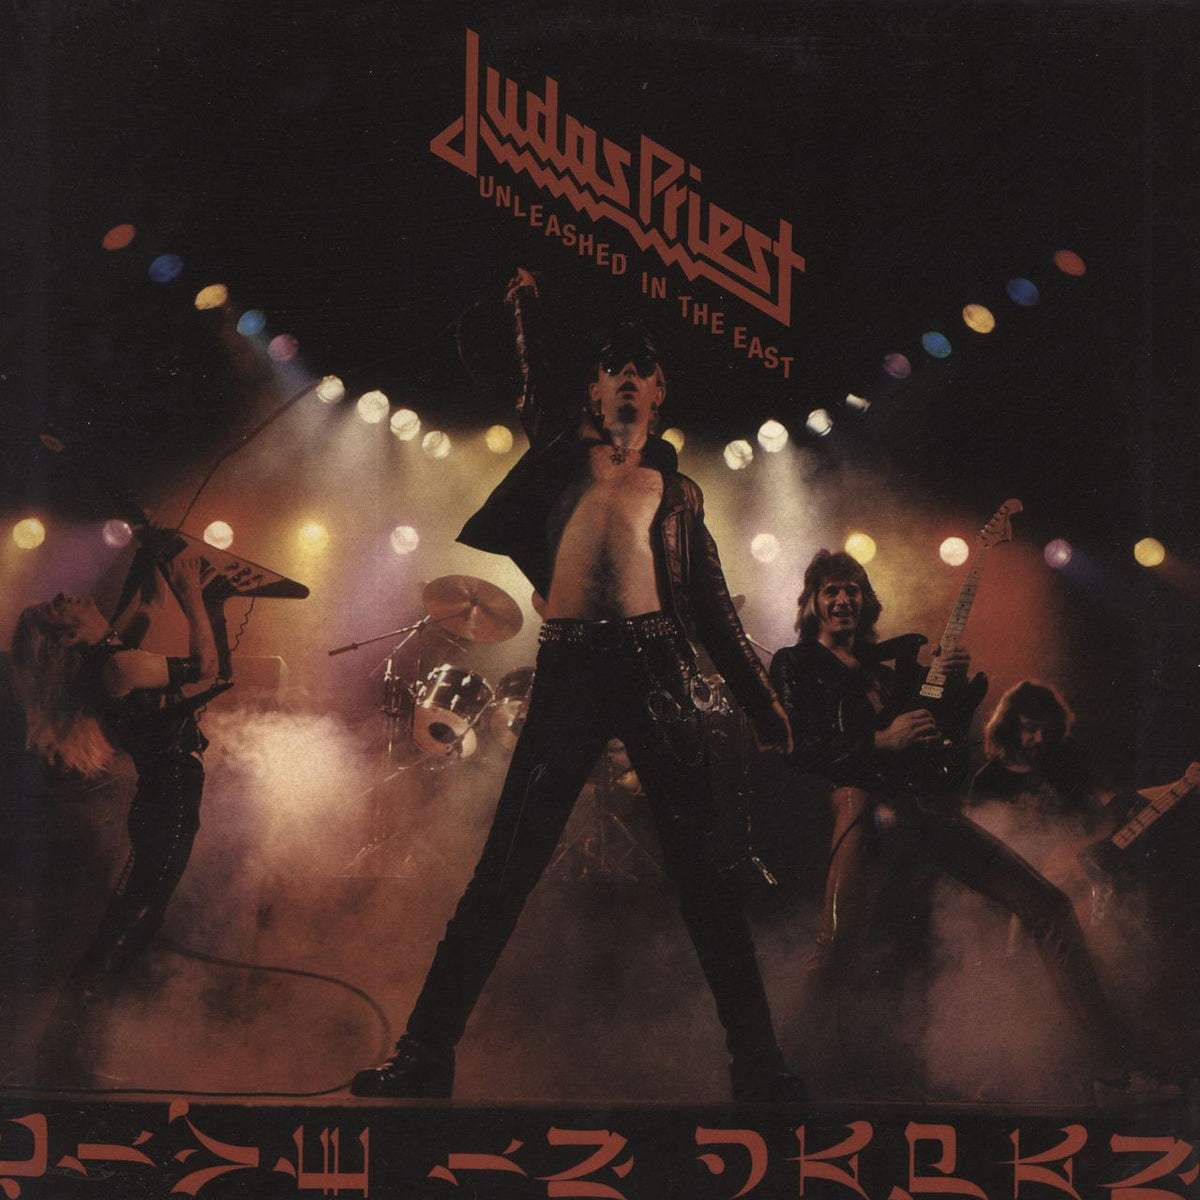 Judas Priest Unleashed In The East (Live In Japan) - Rare Vinyl